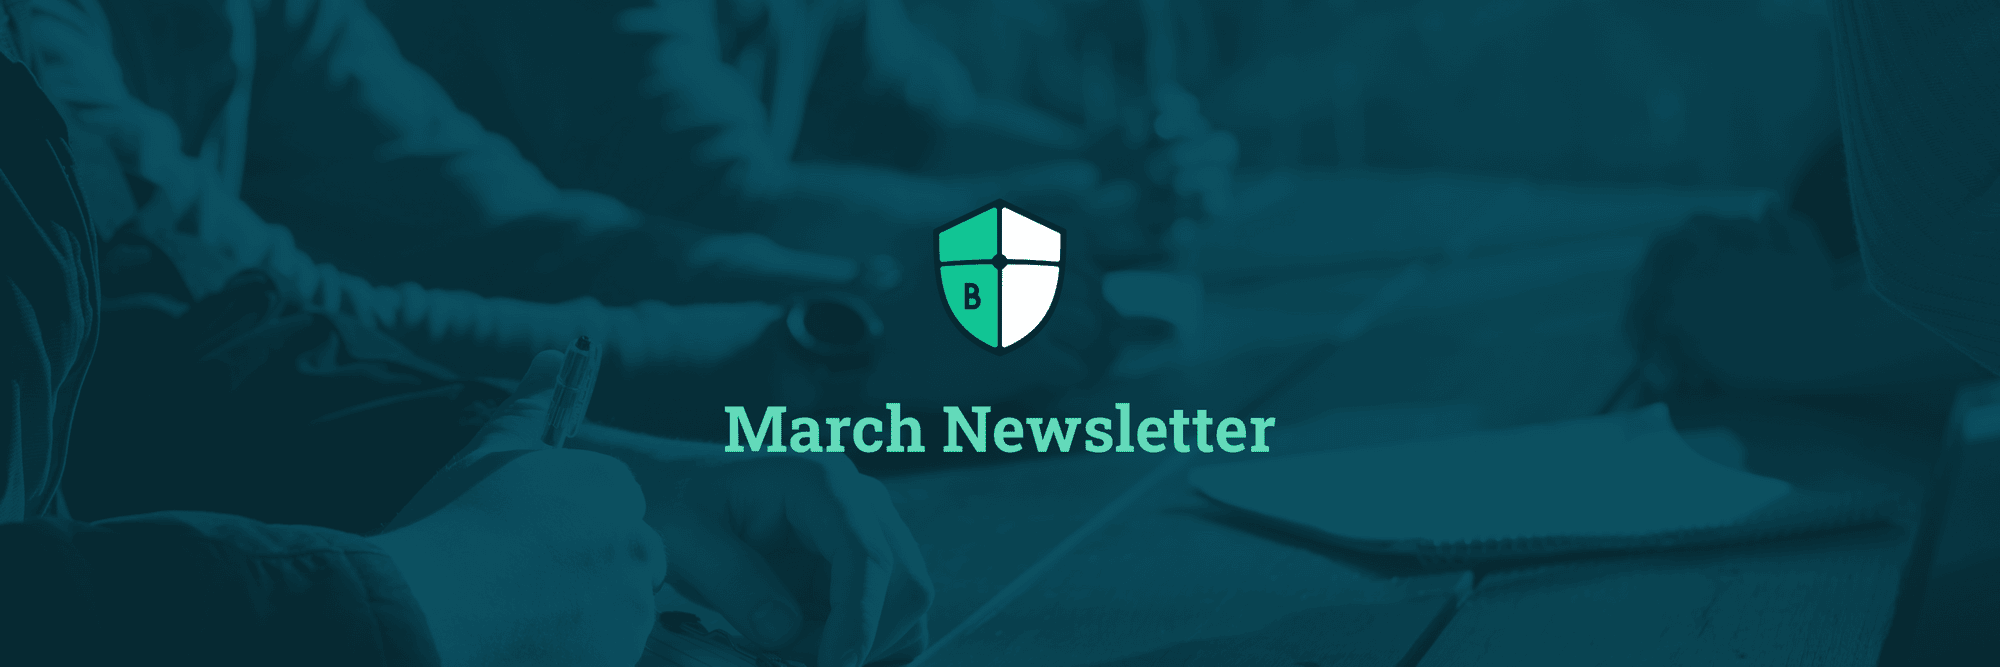 March Newsletter Banner Image